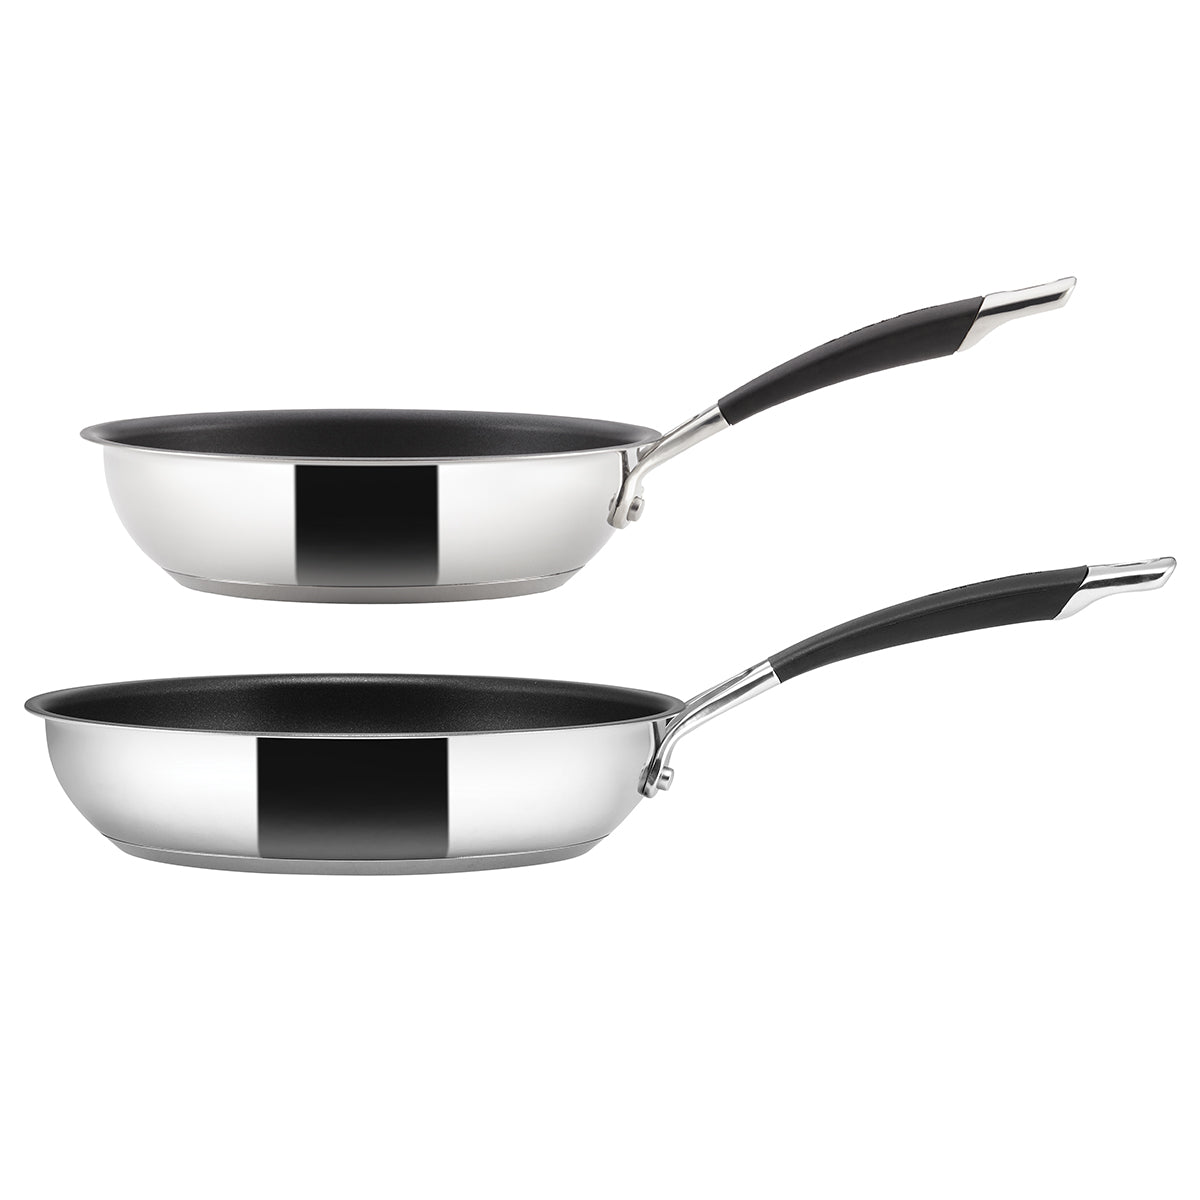 Image of Momentum Stainless Steel Non Stick Frying Pan Set